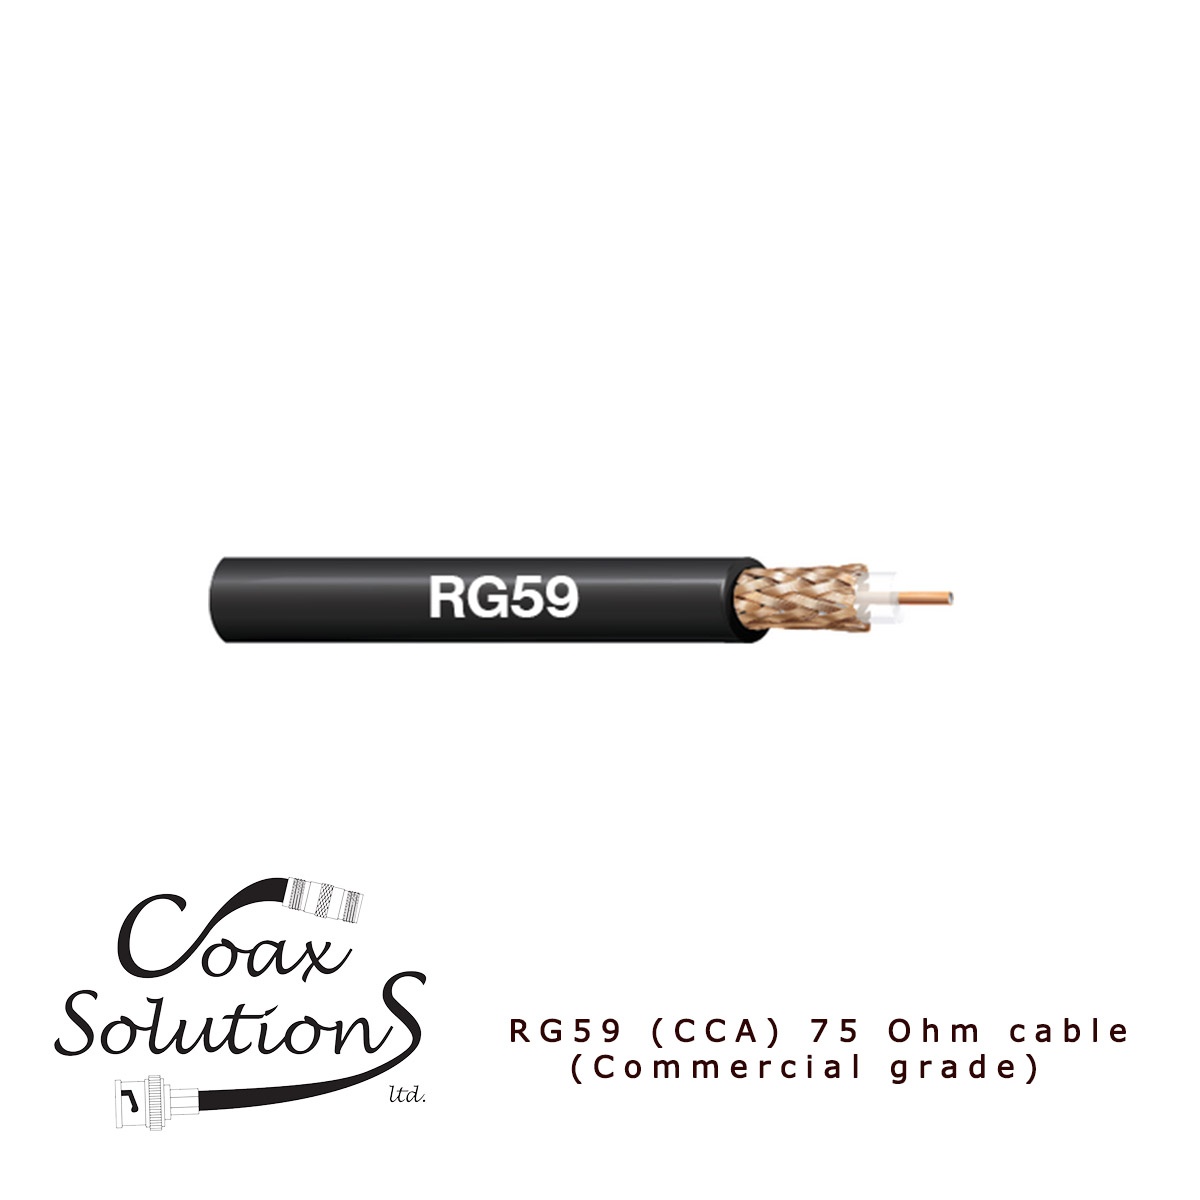 https://www.coaxsolutions.com/shop/rg59-cca-coax-cable/rg59-cca-100m-reel/library/images/RG59%20CCA%20with%20text.jpg